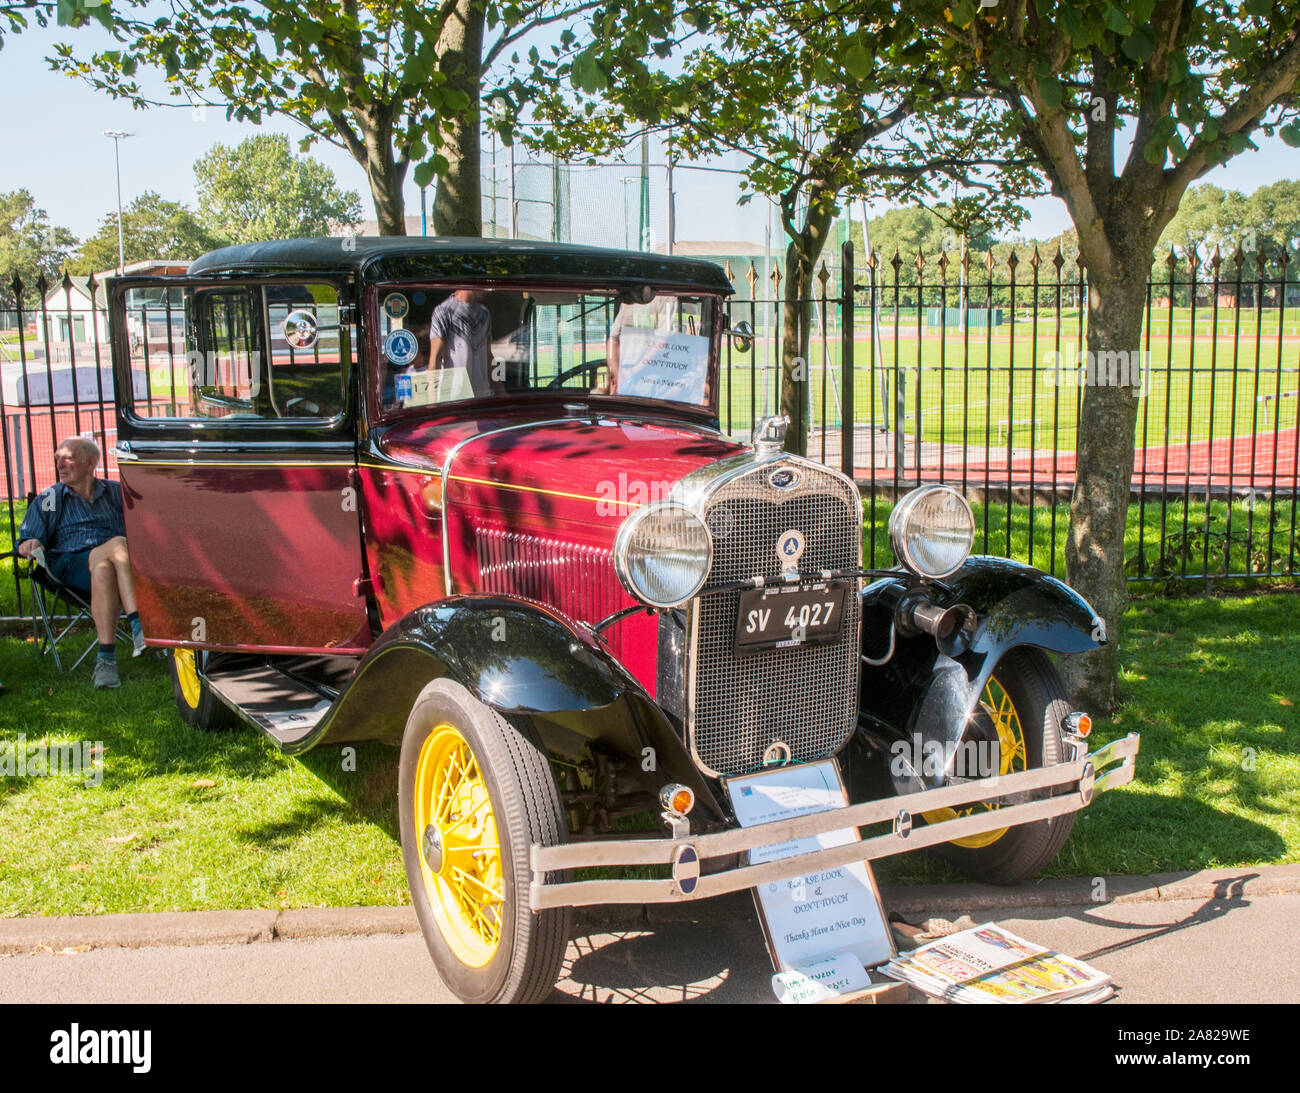 1930 Model A Ford with a 3.3litre 4 cylinder sidevalve engine. The favourite fast getaway car of gangsters John Dillinger and Bonnie and Clyde. Stock Photo